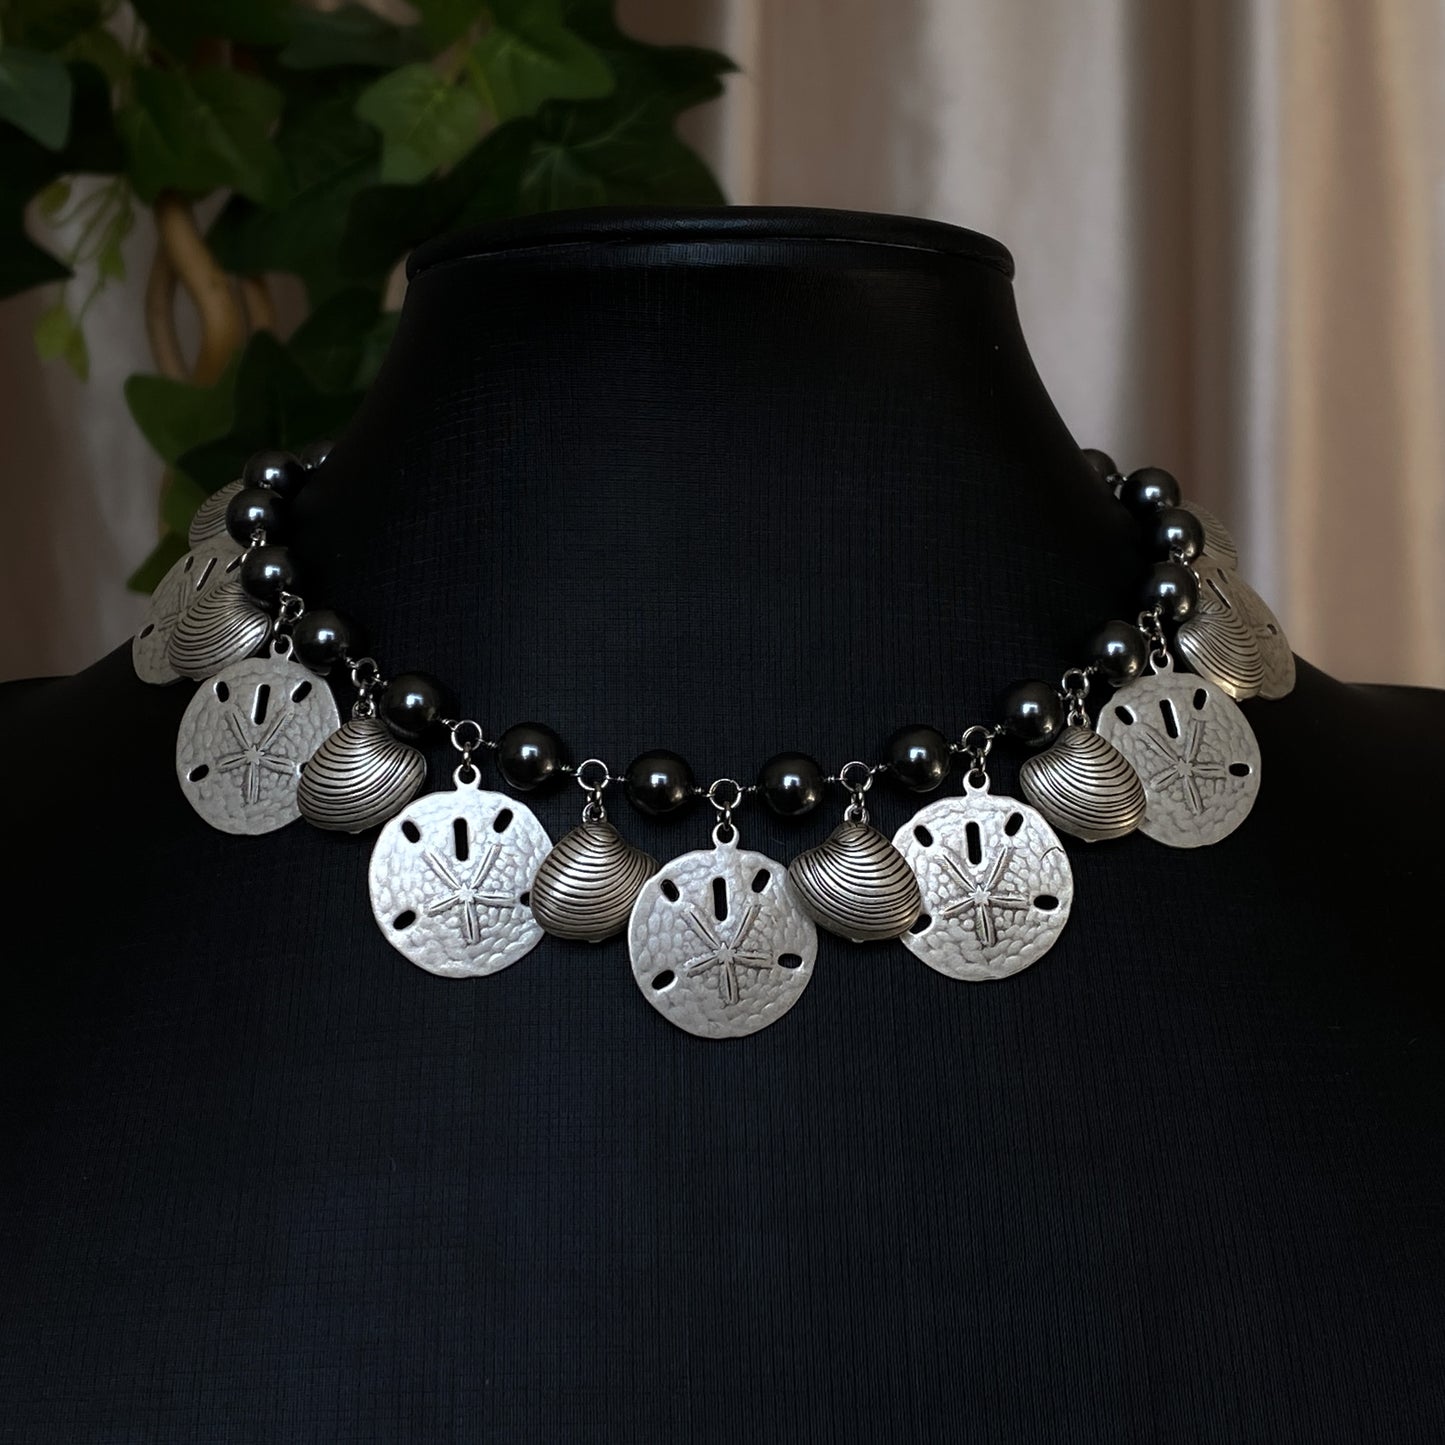 Tara ~ Dark Siren Shell Charm Choker with Glass Pearls, Antique Silver Shells and Stainless Steel